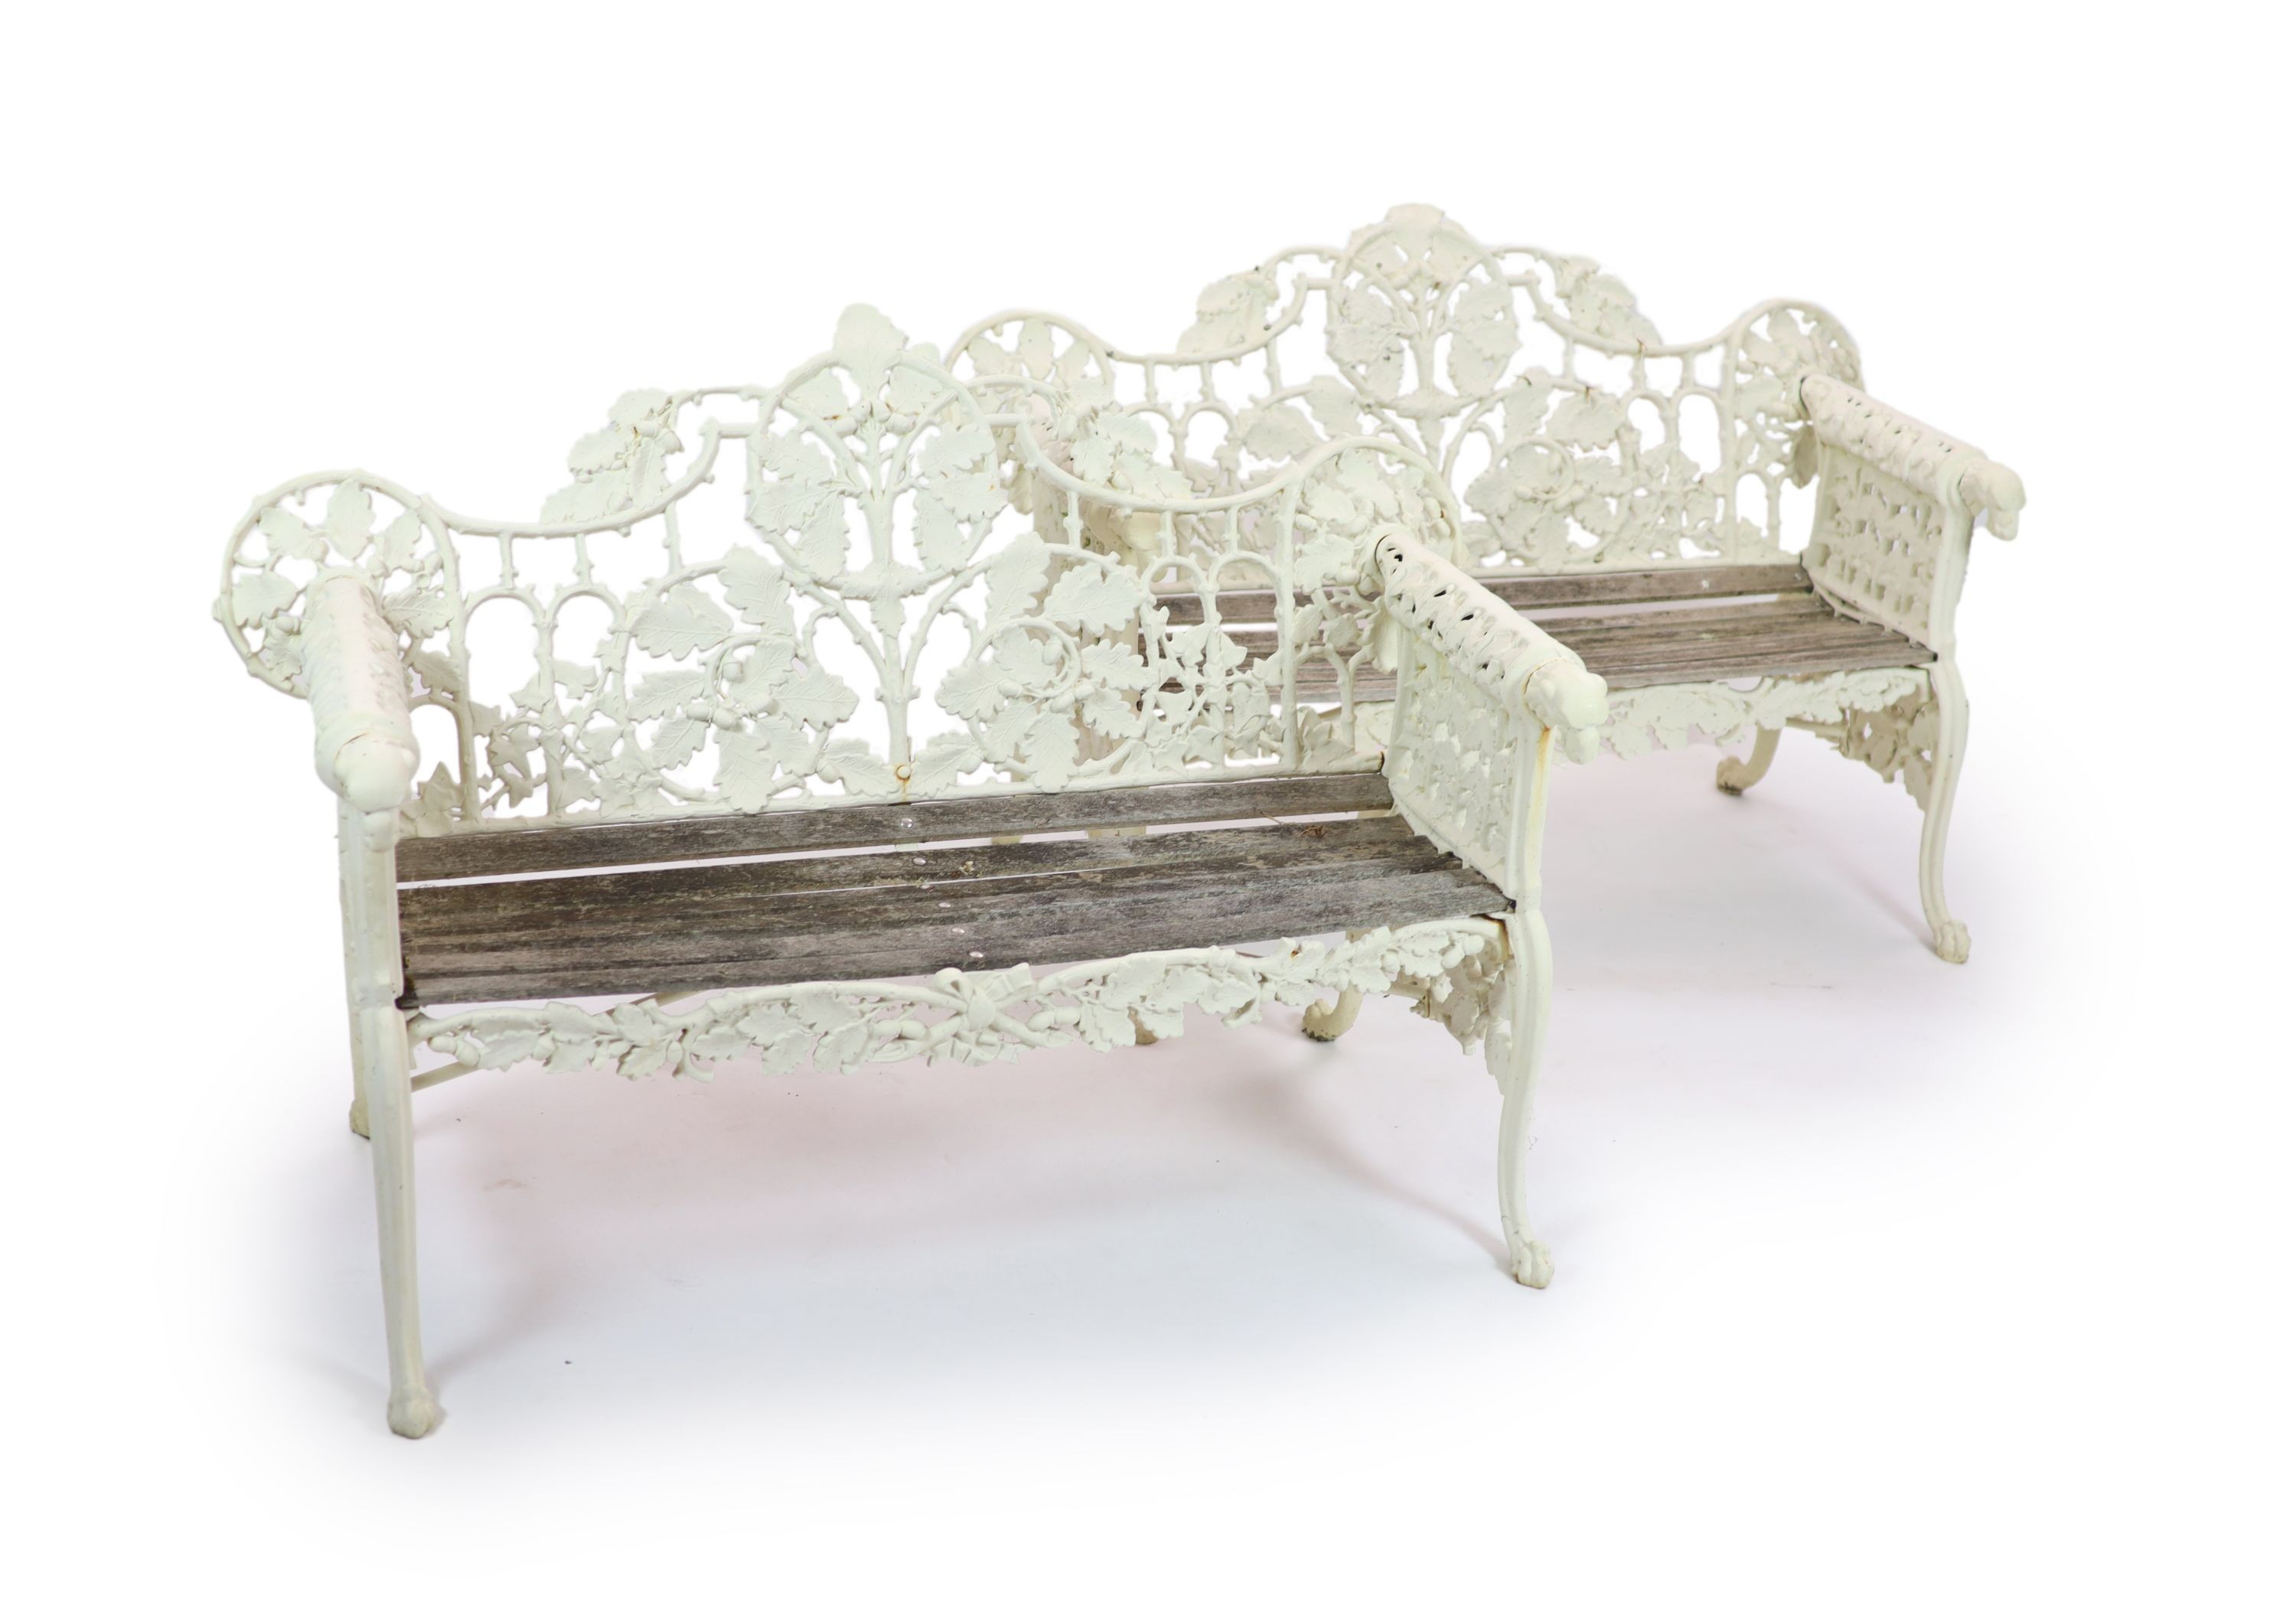 After Coalbrookdale, a pair of cast iron ‘Oak and ivy' benches H 95cm. W 148cm. D 68cm.